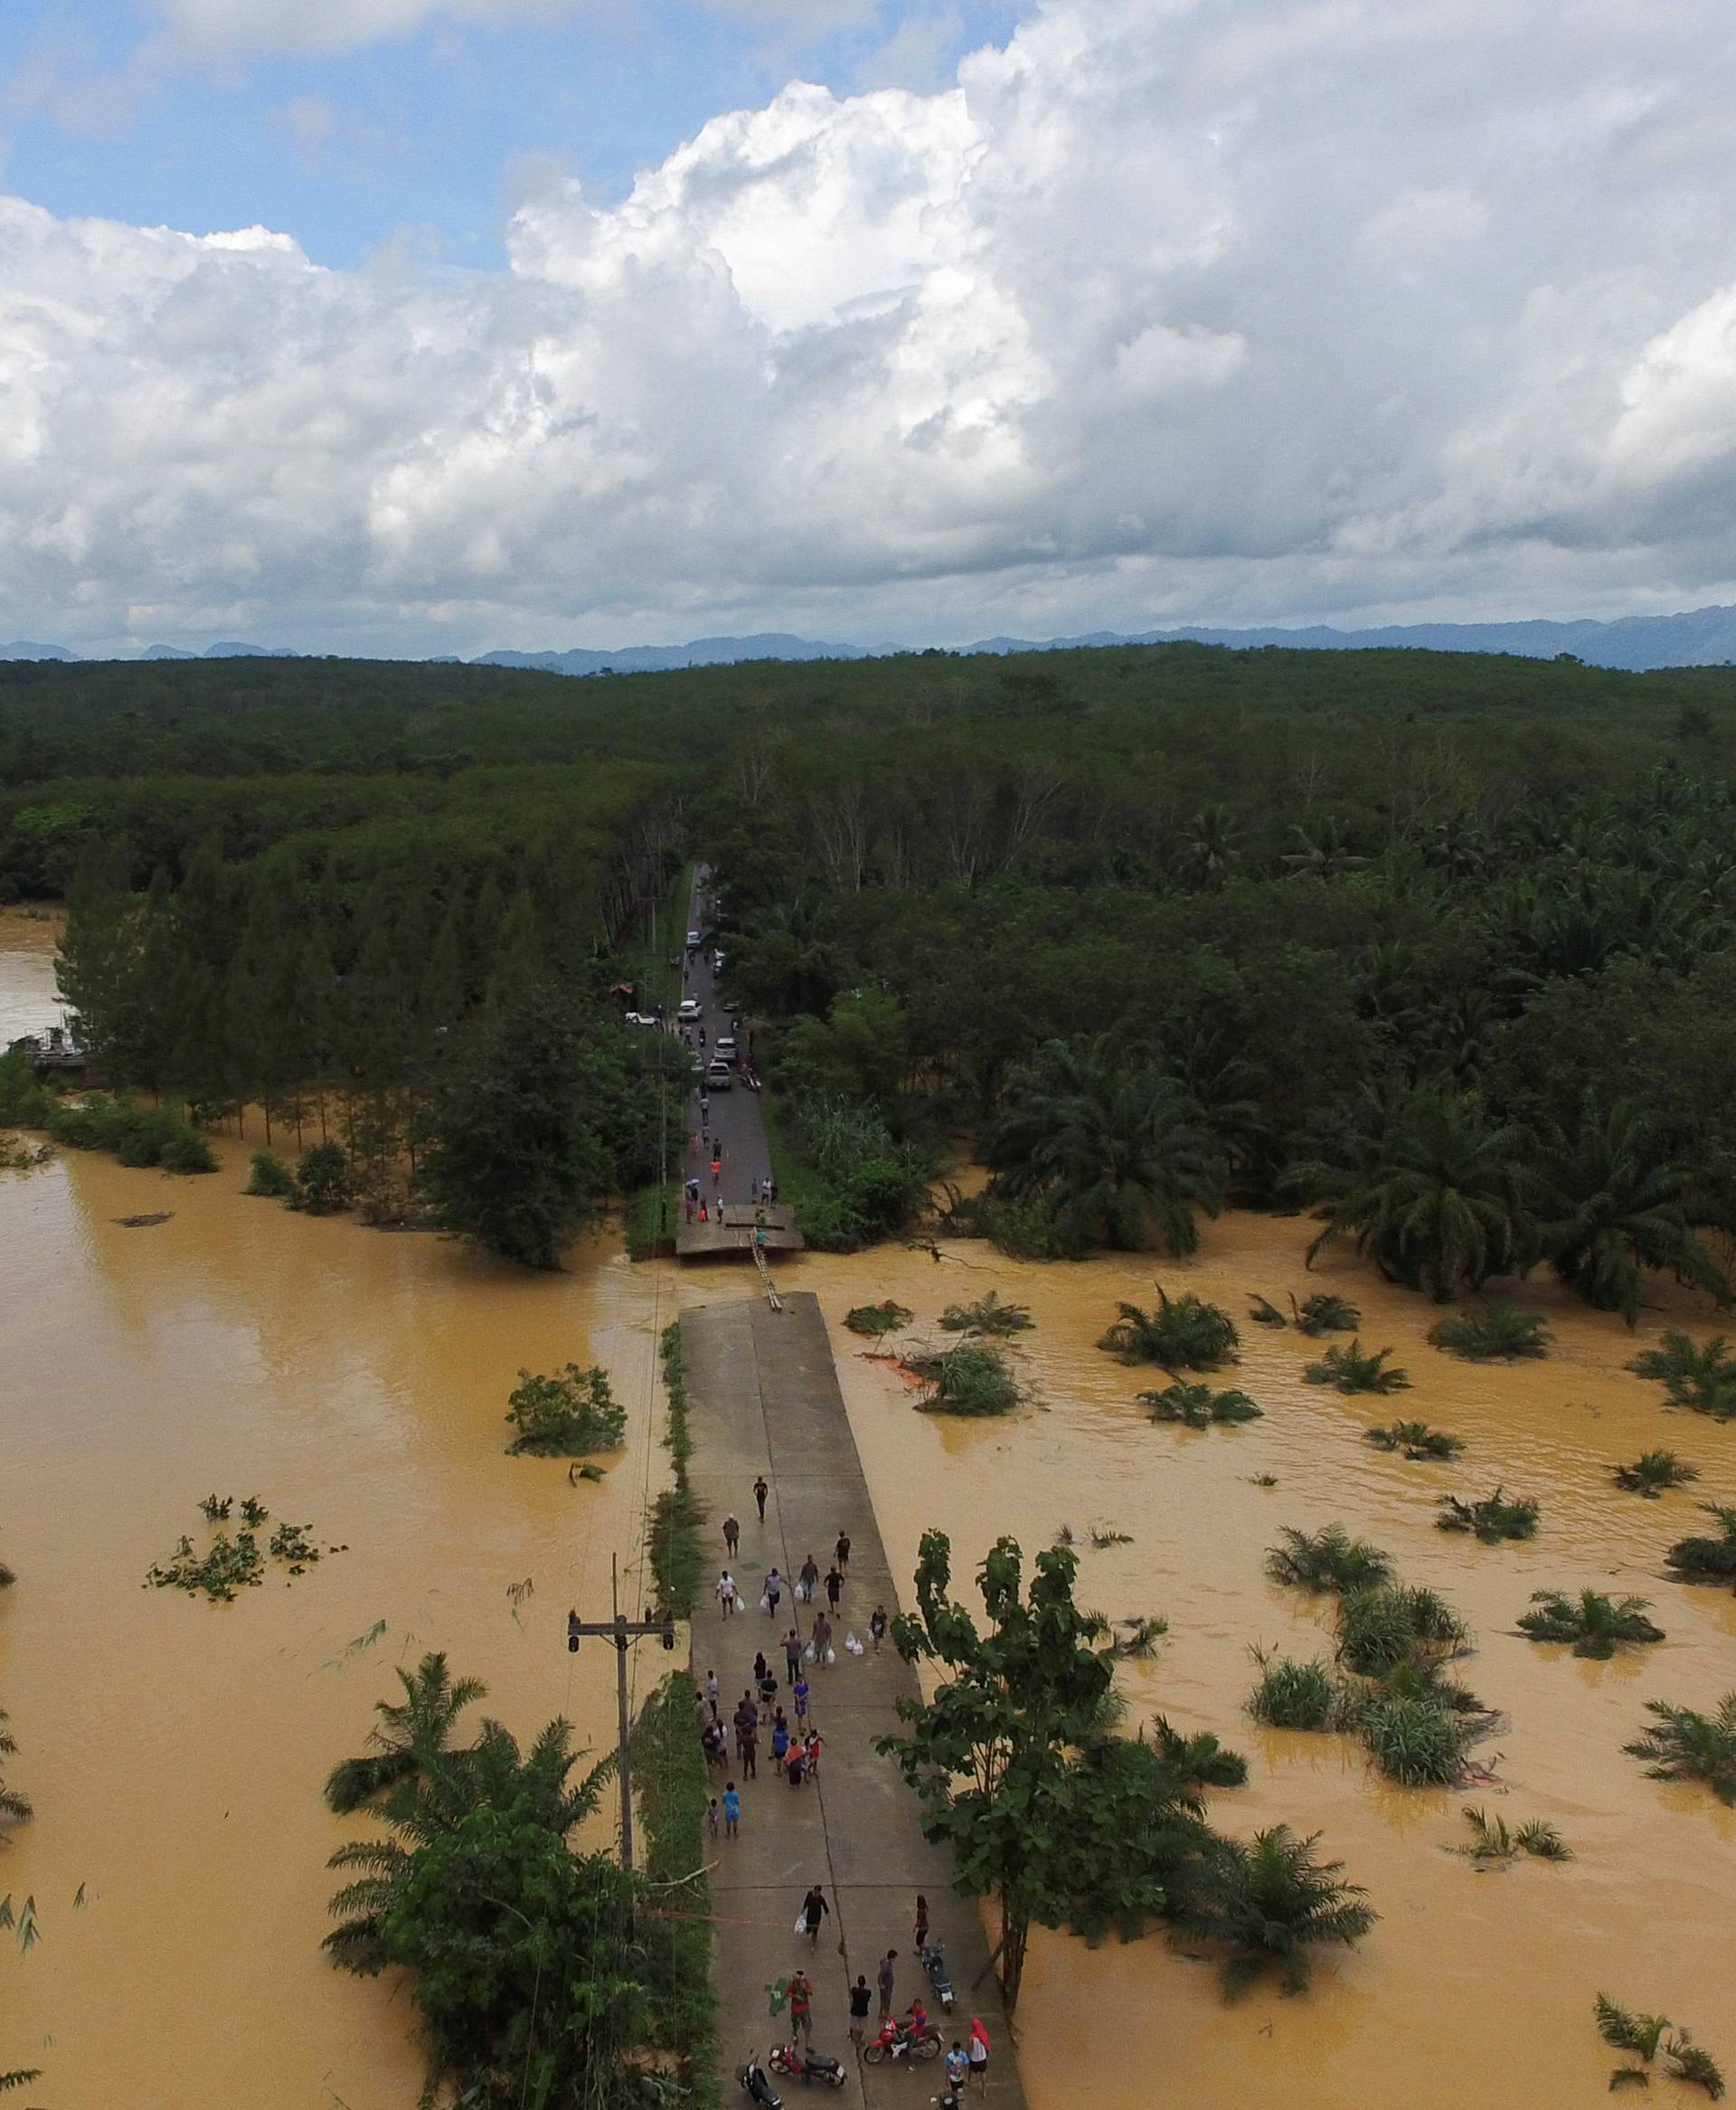 A bridge damaged by floods is pictured at Chai Buri District, Surat Thani province